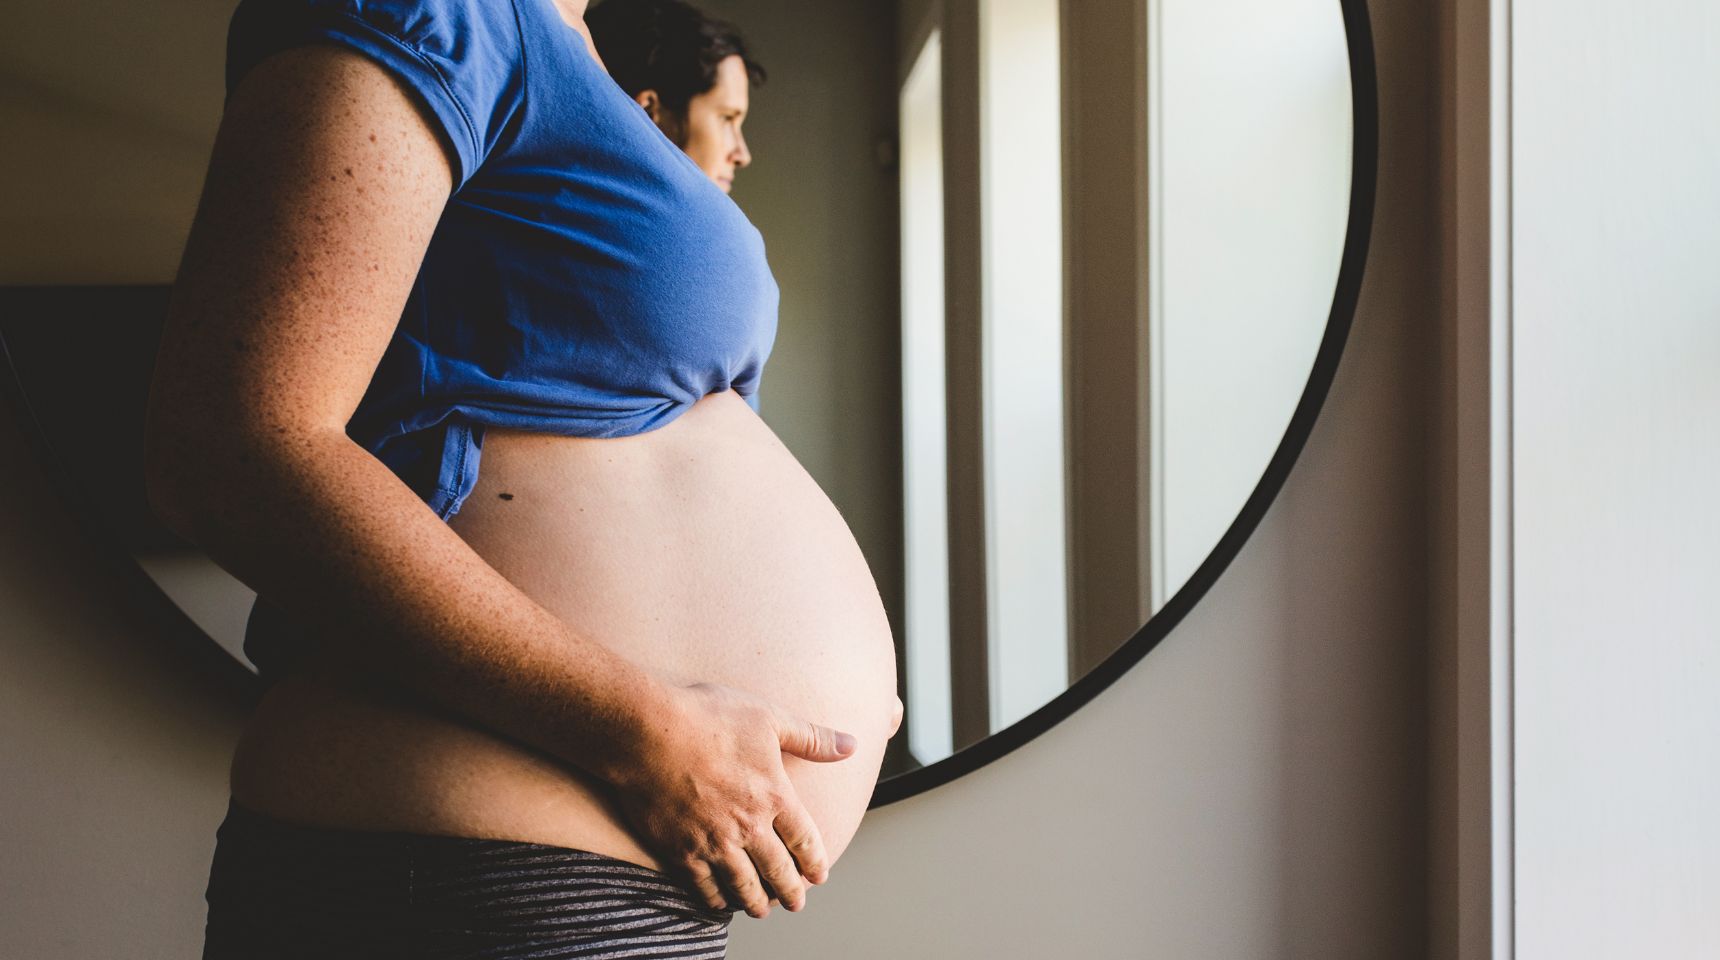 How Does Pregnancy Change Your Abdomen?